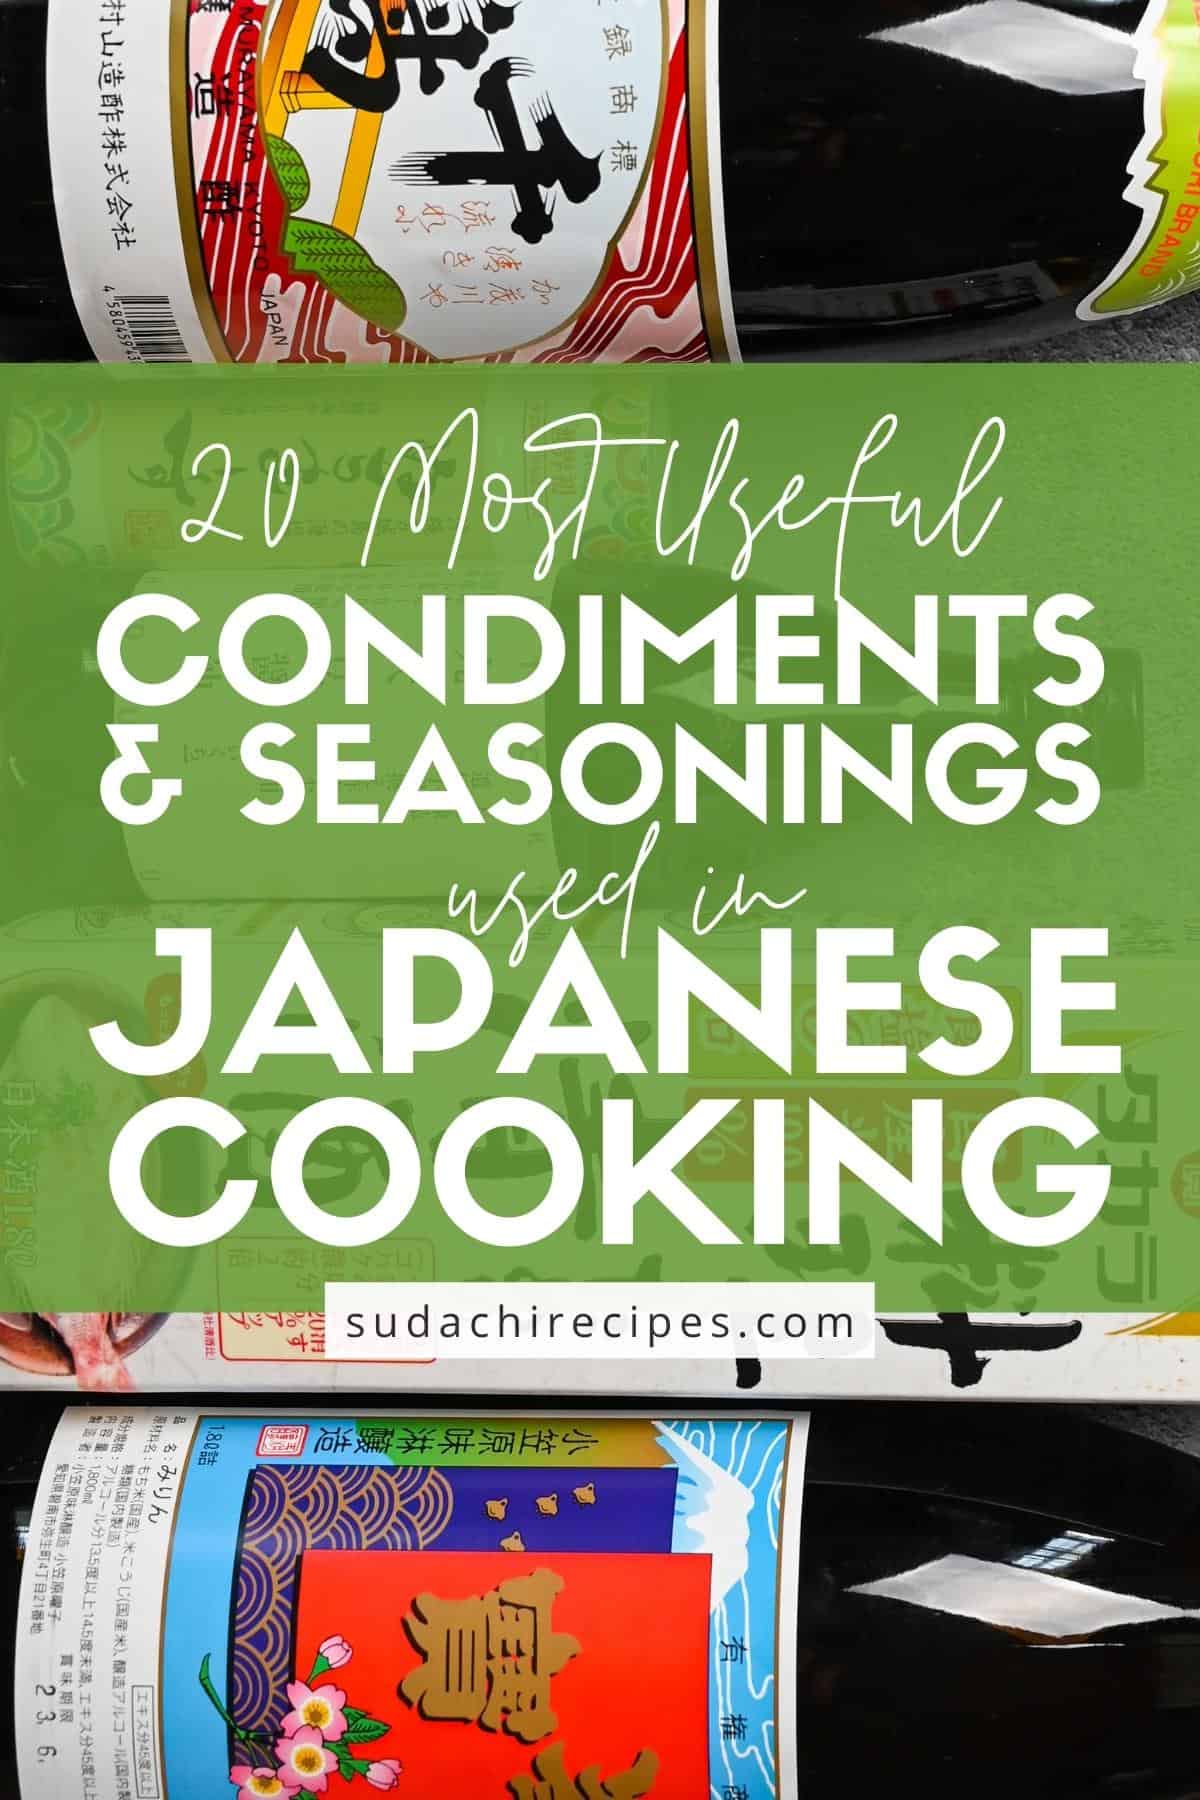 20 most useful condiments and seasonings for Japanese cooking